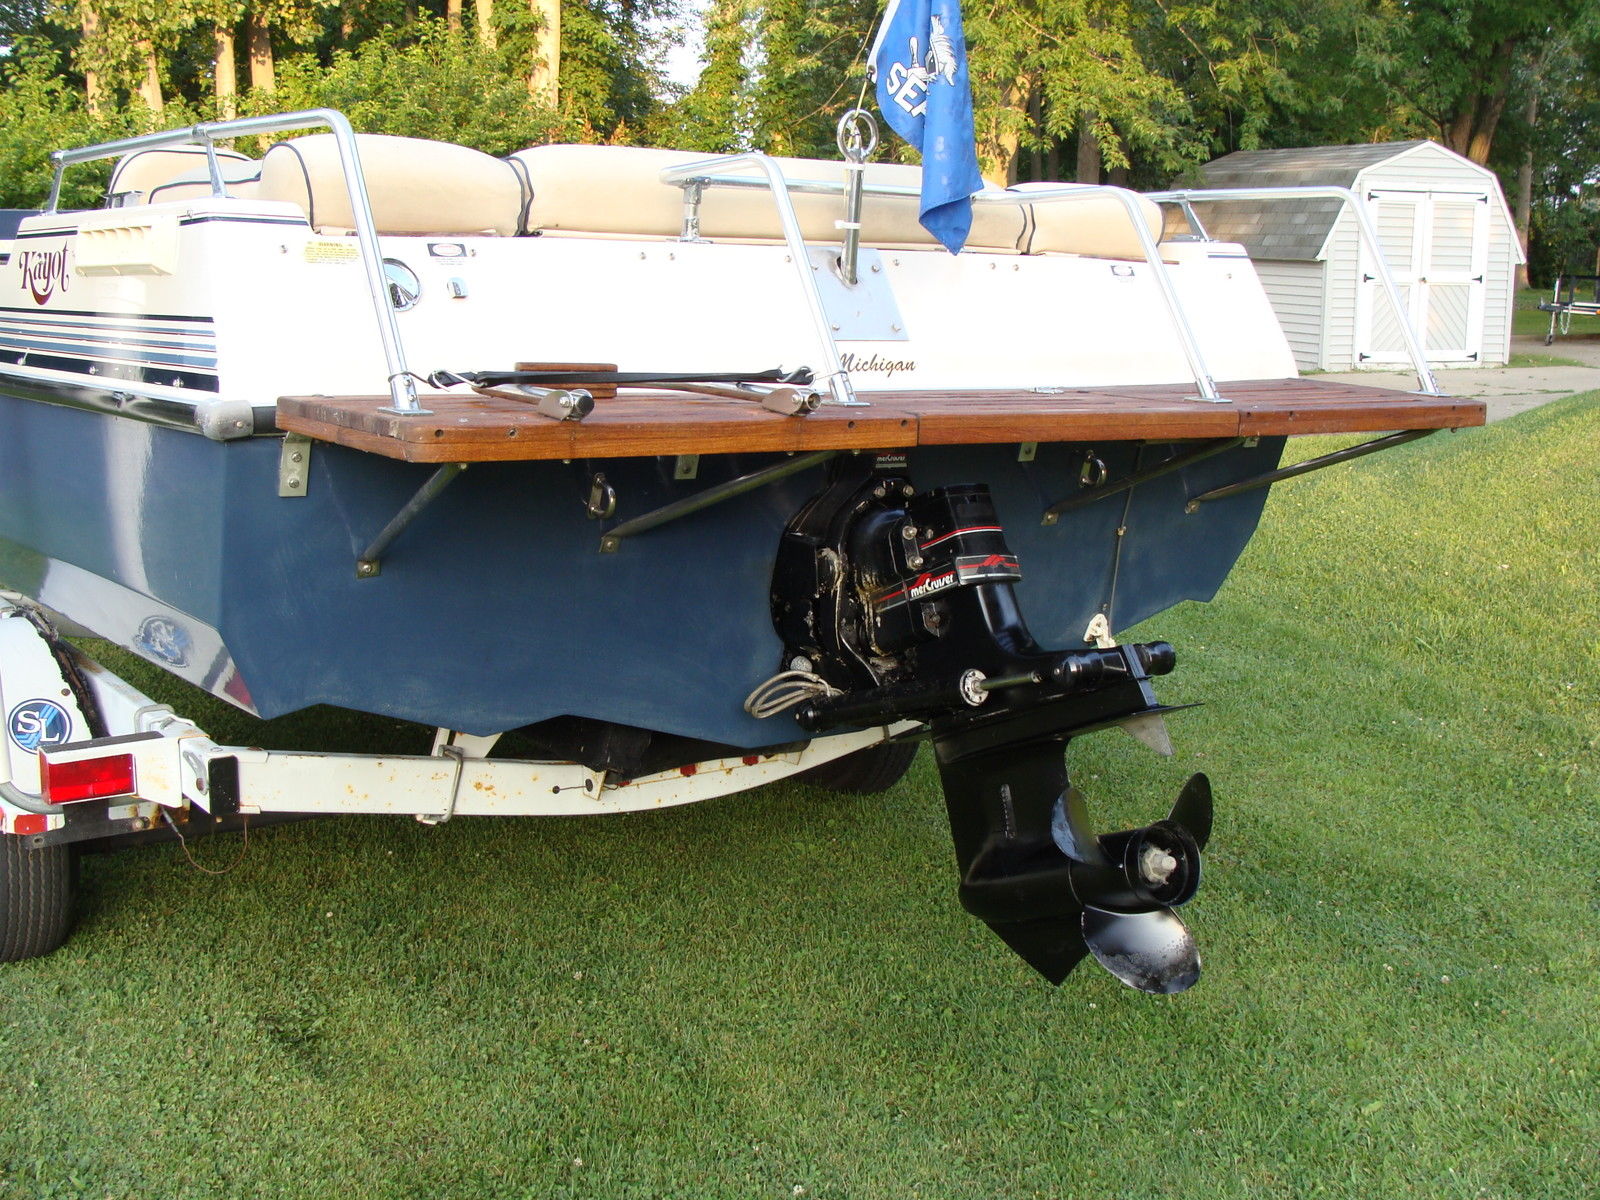 Kayot 17 ' Limited Deck Boat 1988 for sale for $2,350 